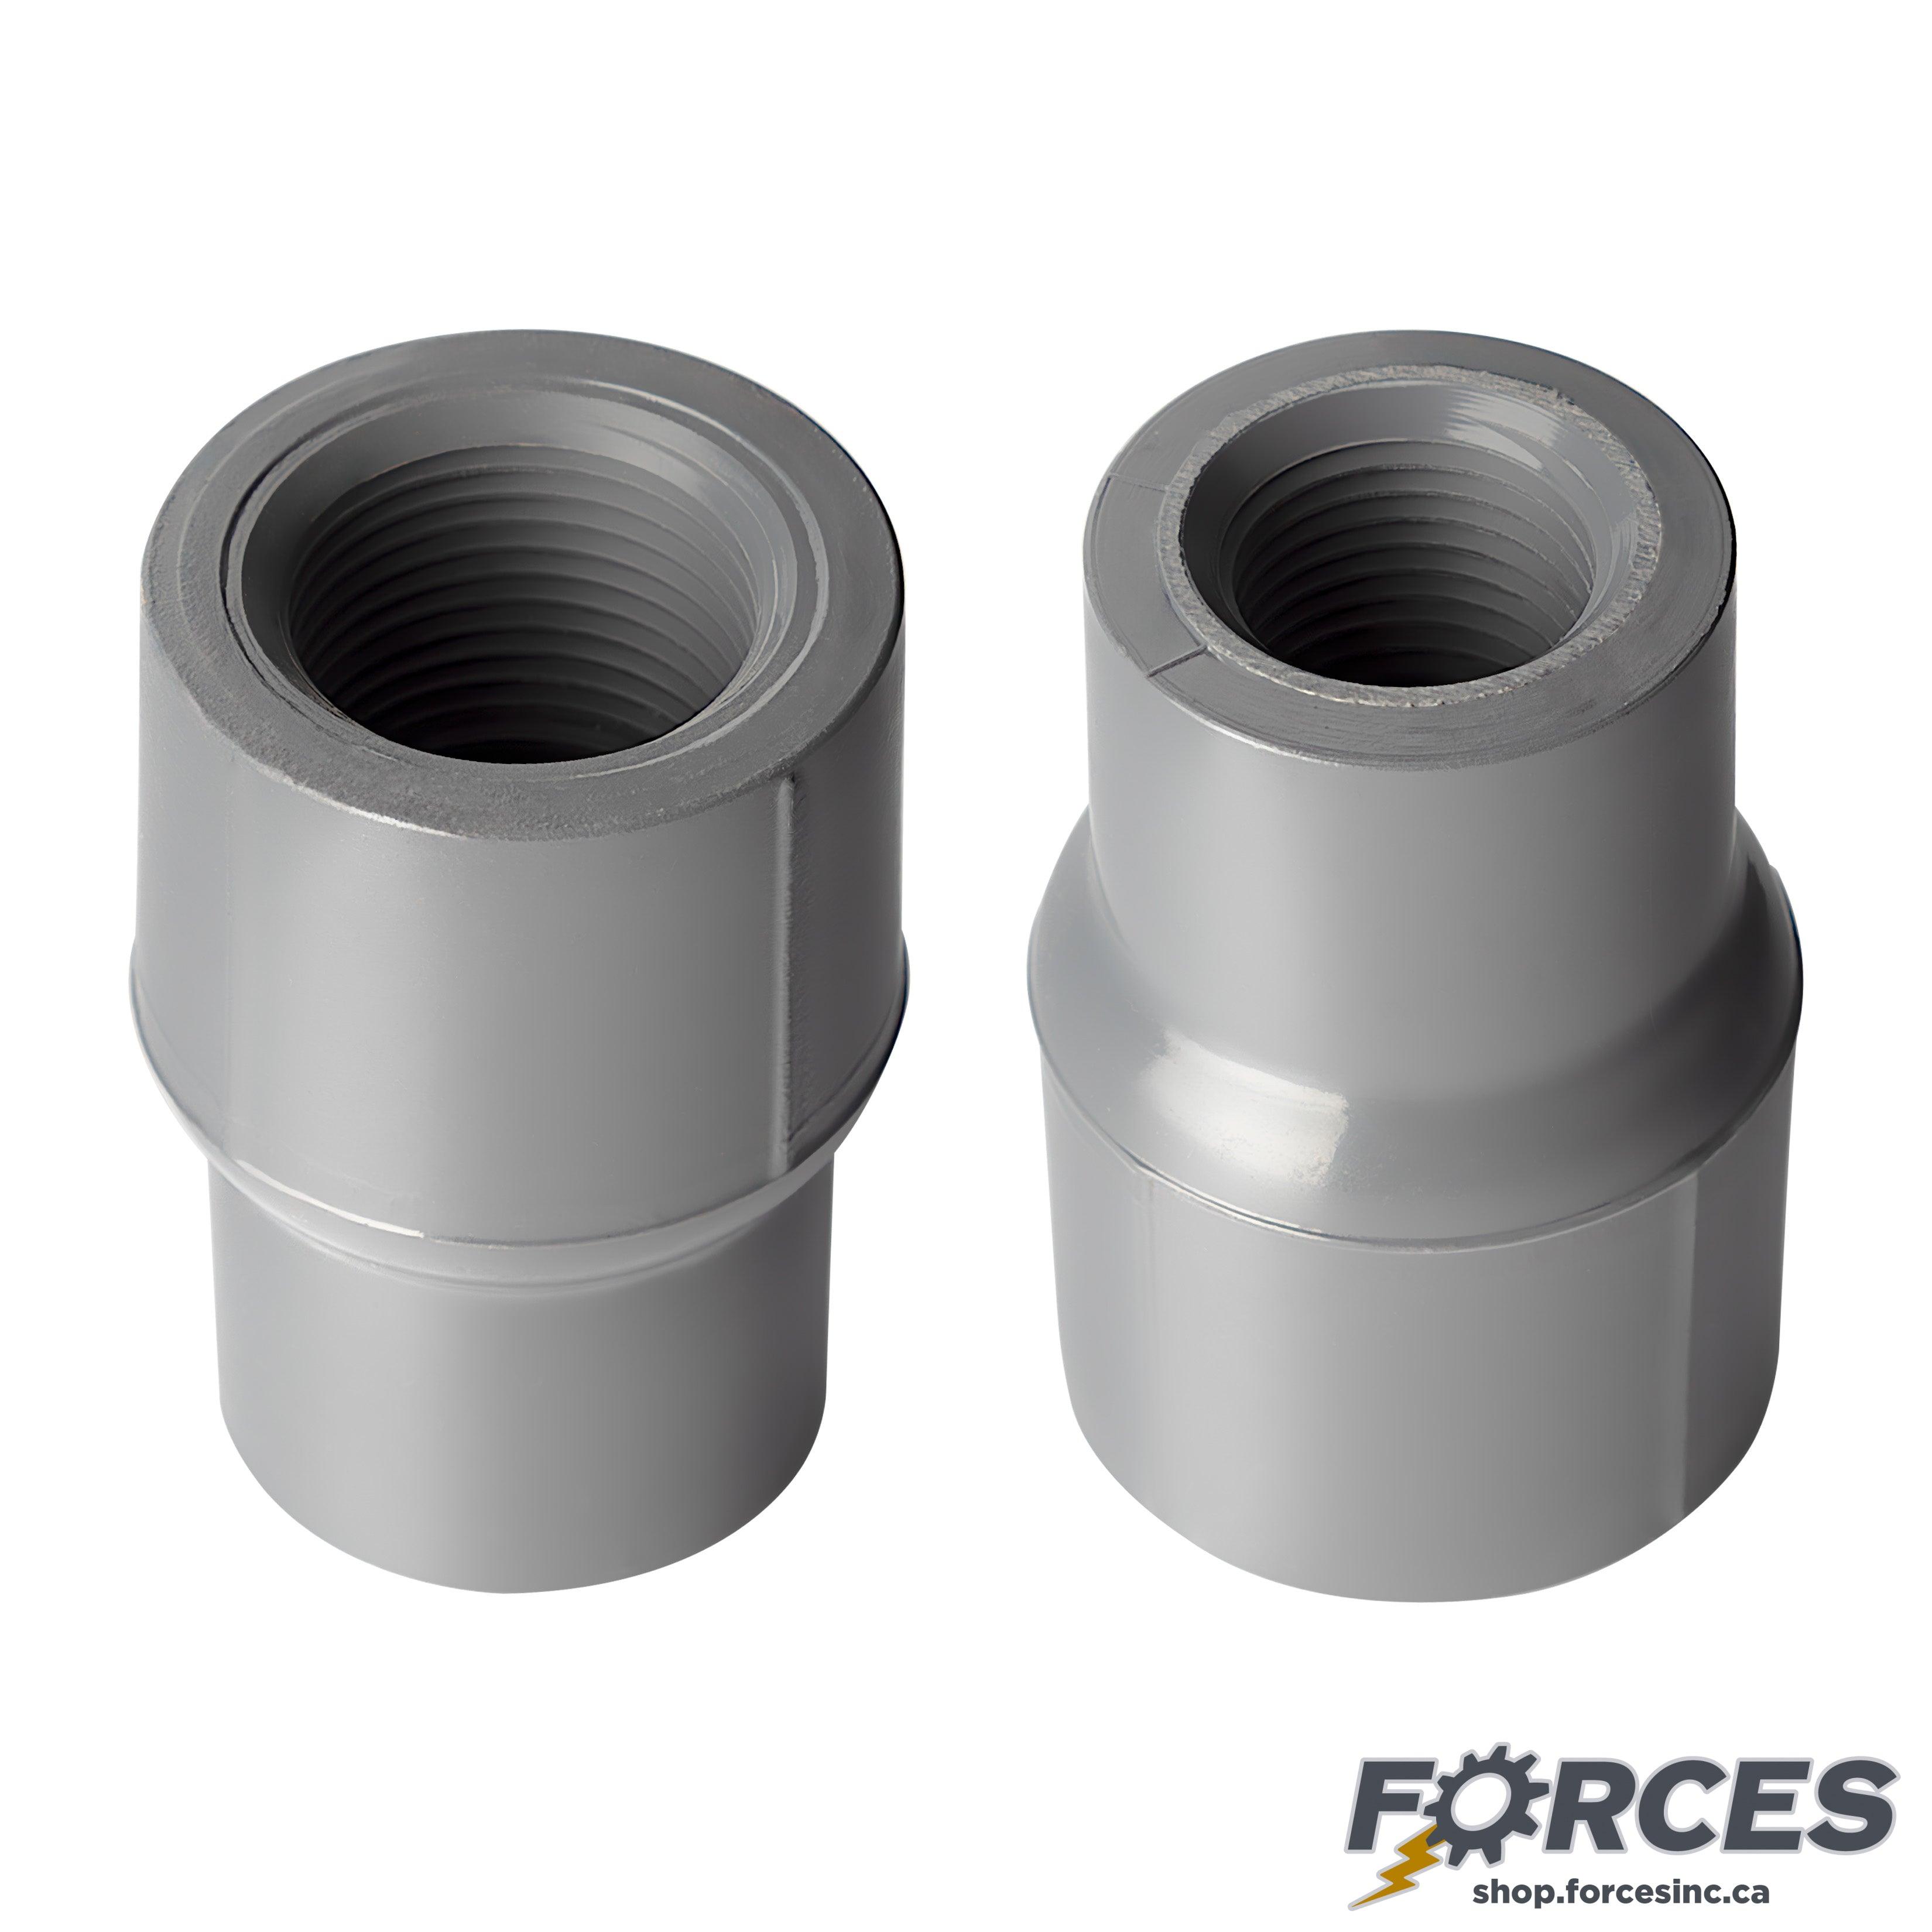 2" x 1-1/2" Reducing Coupling (Threaded) Sch 80 - PVC Grey | 830251 - Forces Inc